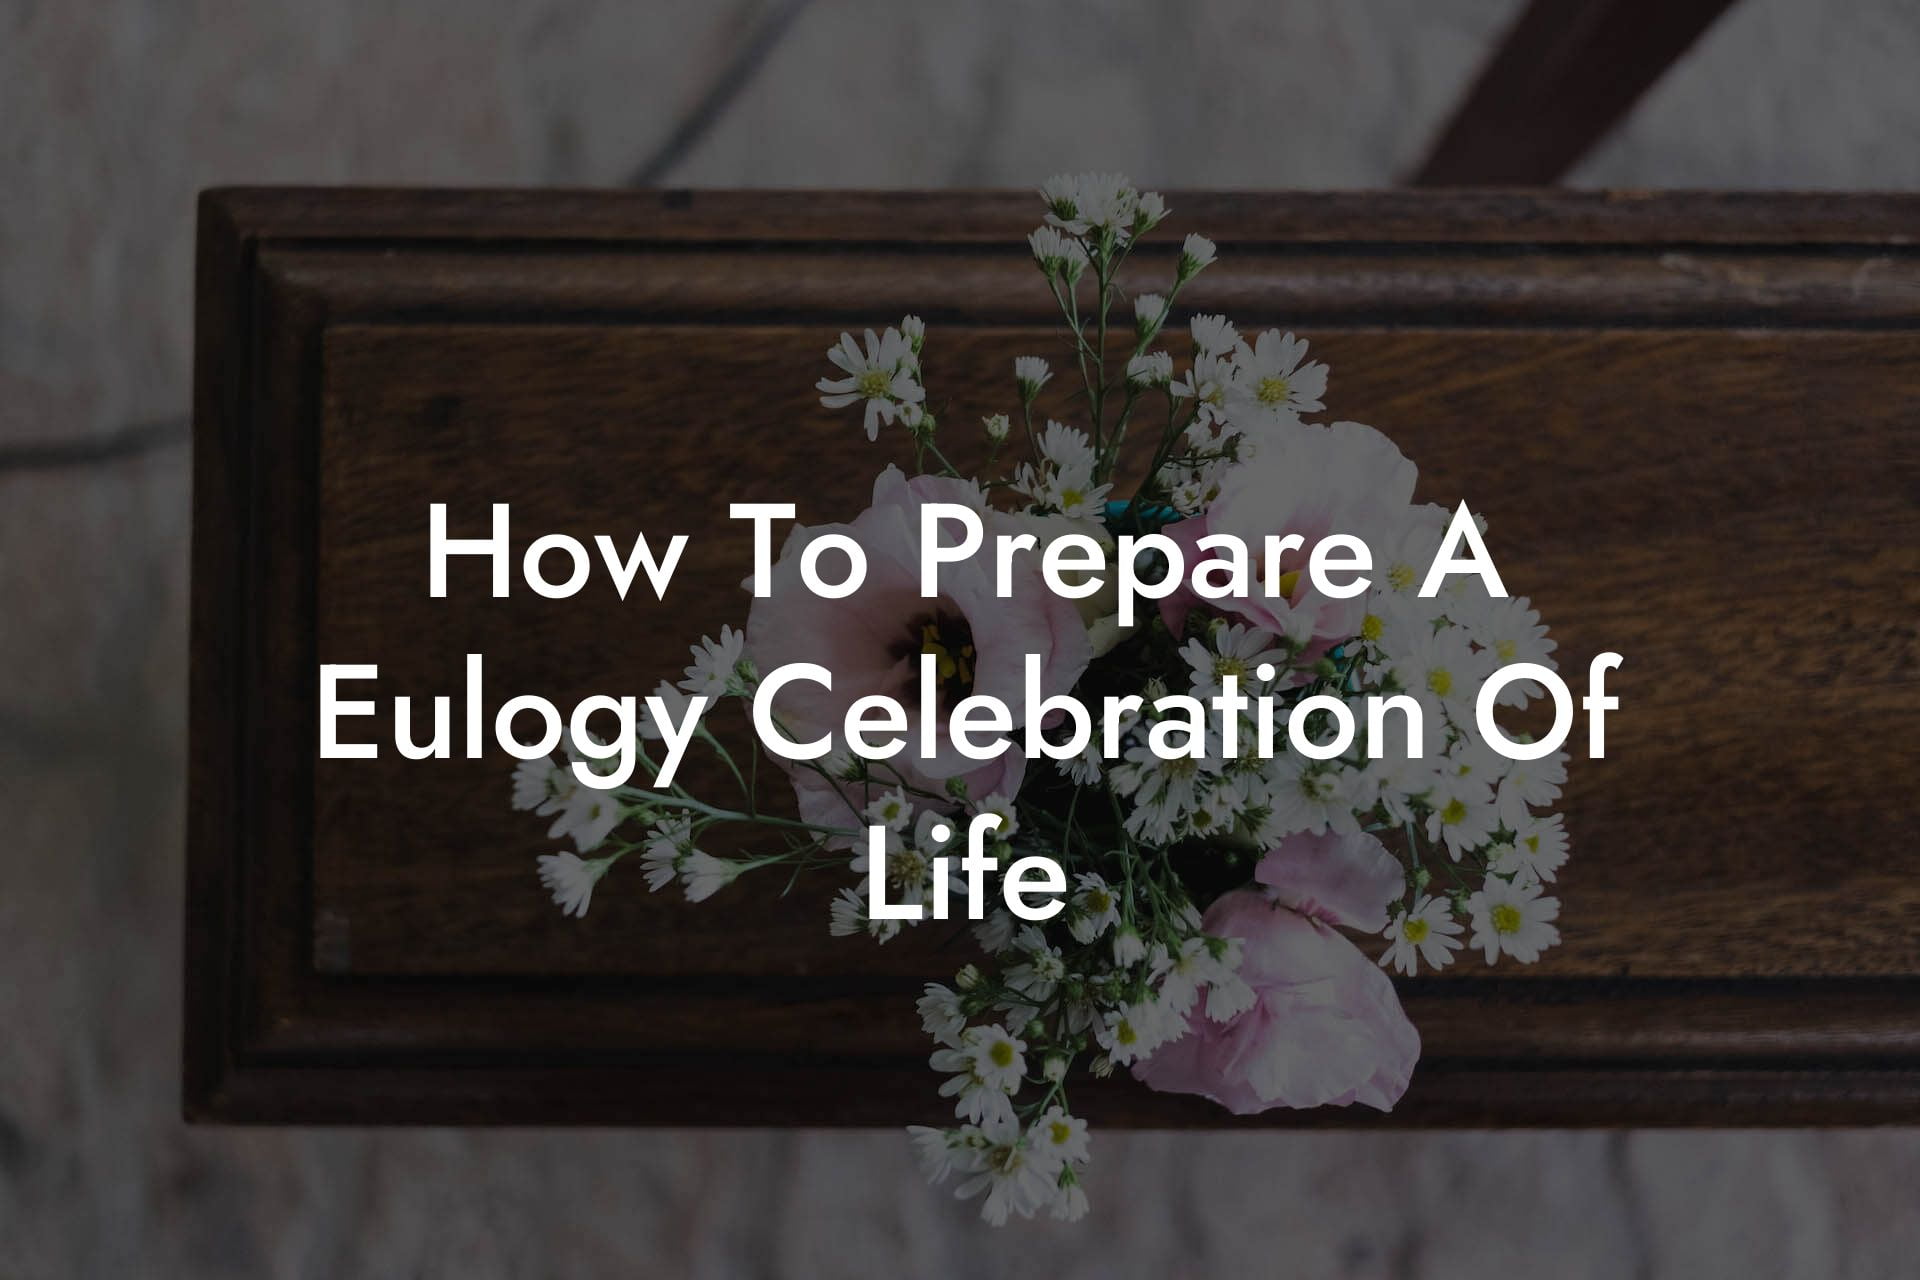 How To Prepare A Eulogy Celebration Of Life